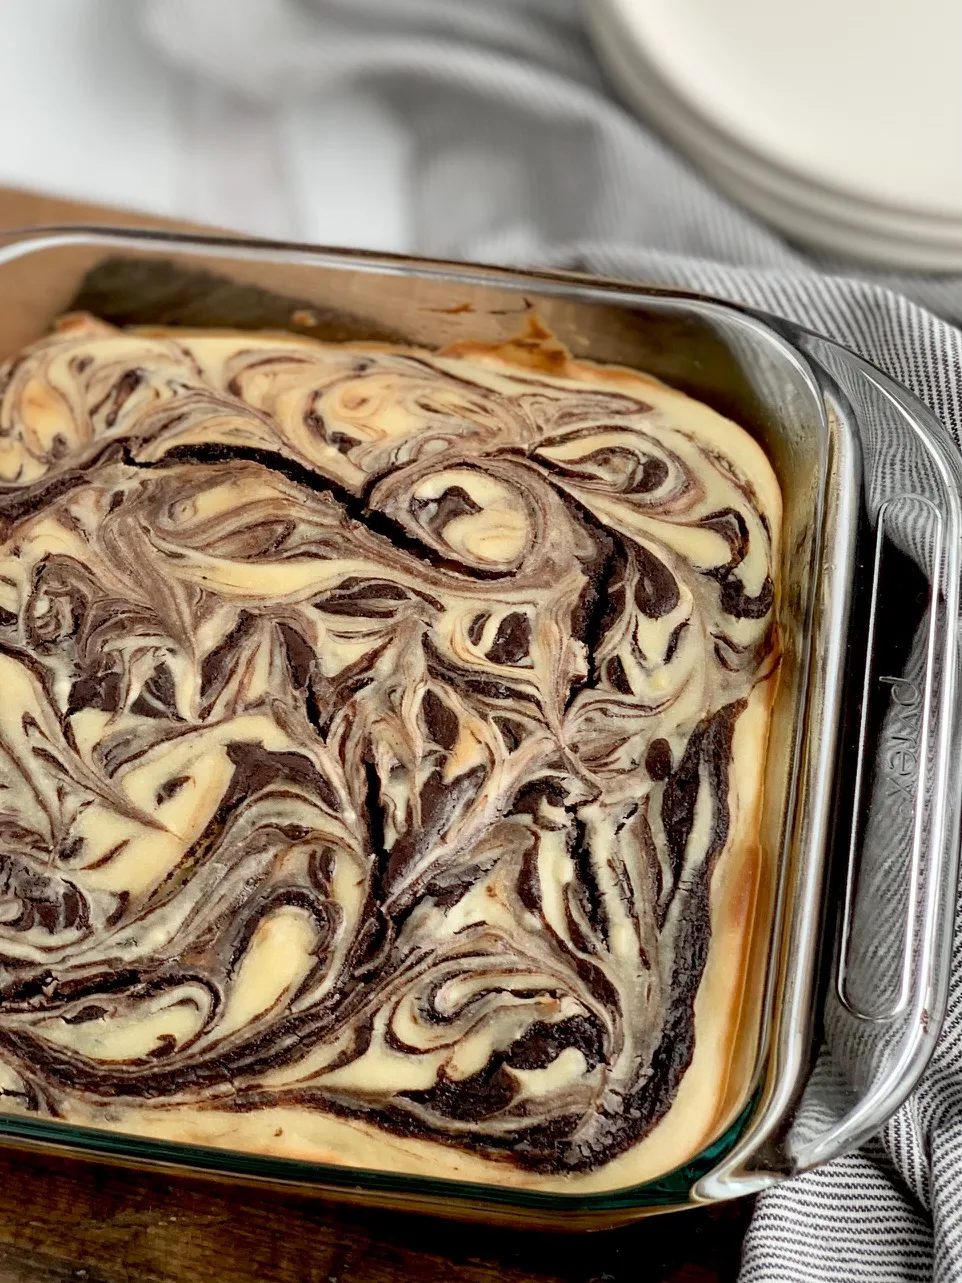 A glass 8x8-inch baking dish filled with a baked marbled brownie mixture with swirls of cream cheese and dessert plates in the background.